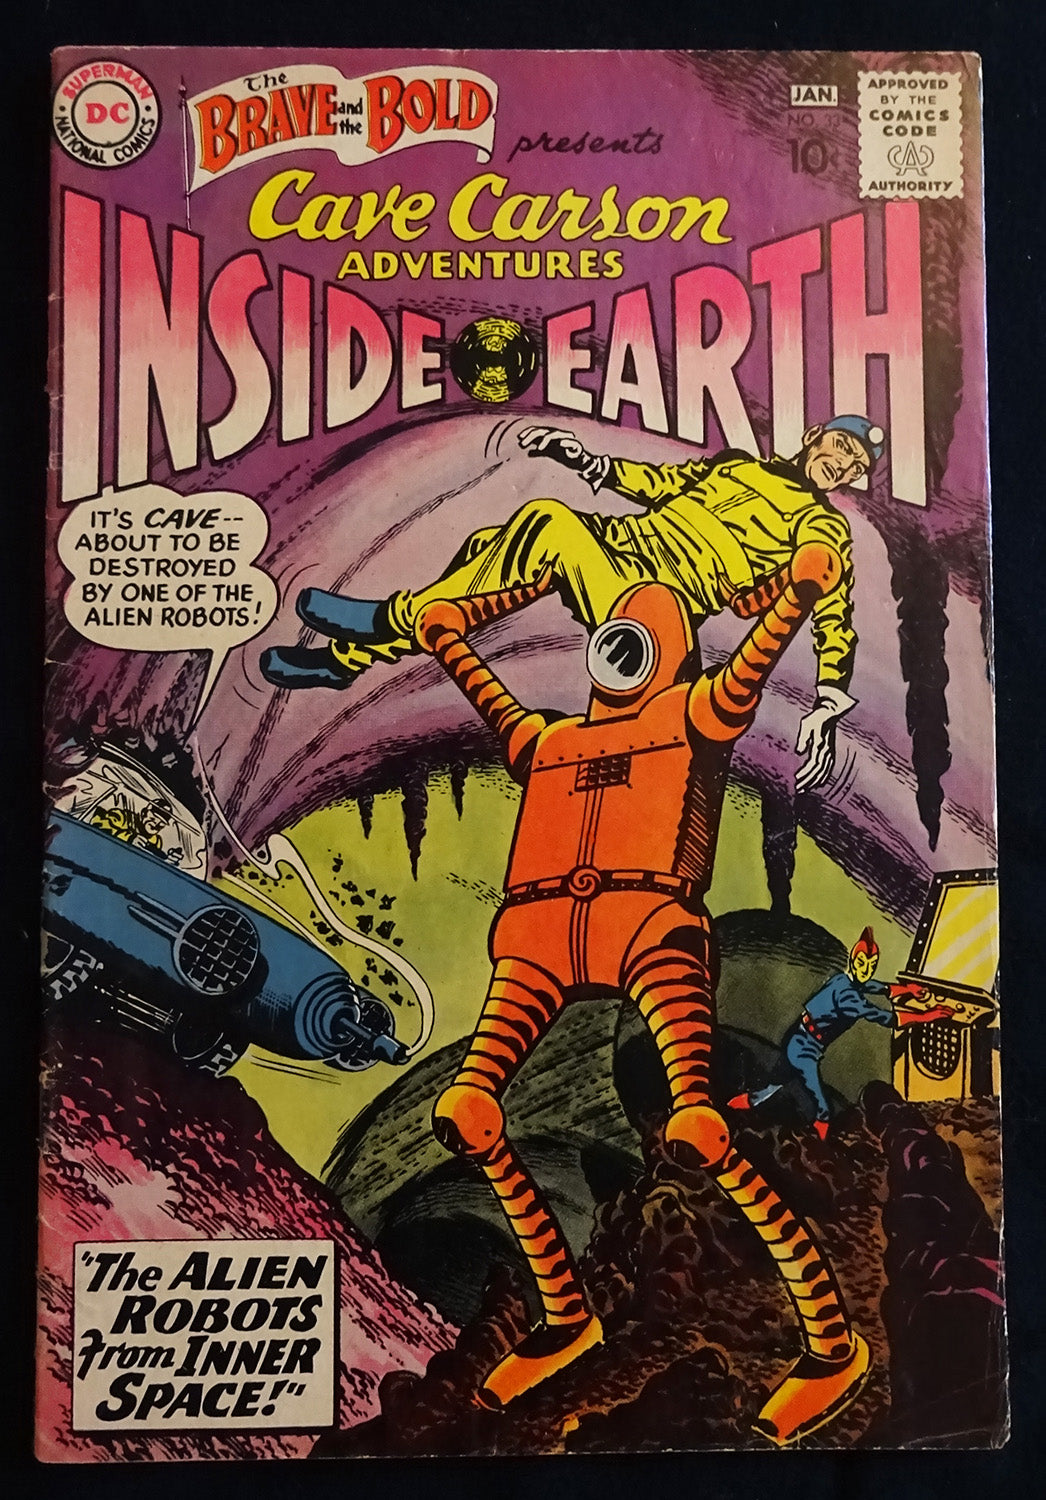 The Brave And The Bold presents Cave Carson Adventures Inside Earth #33 DC Comics January 1960